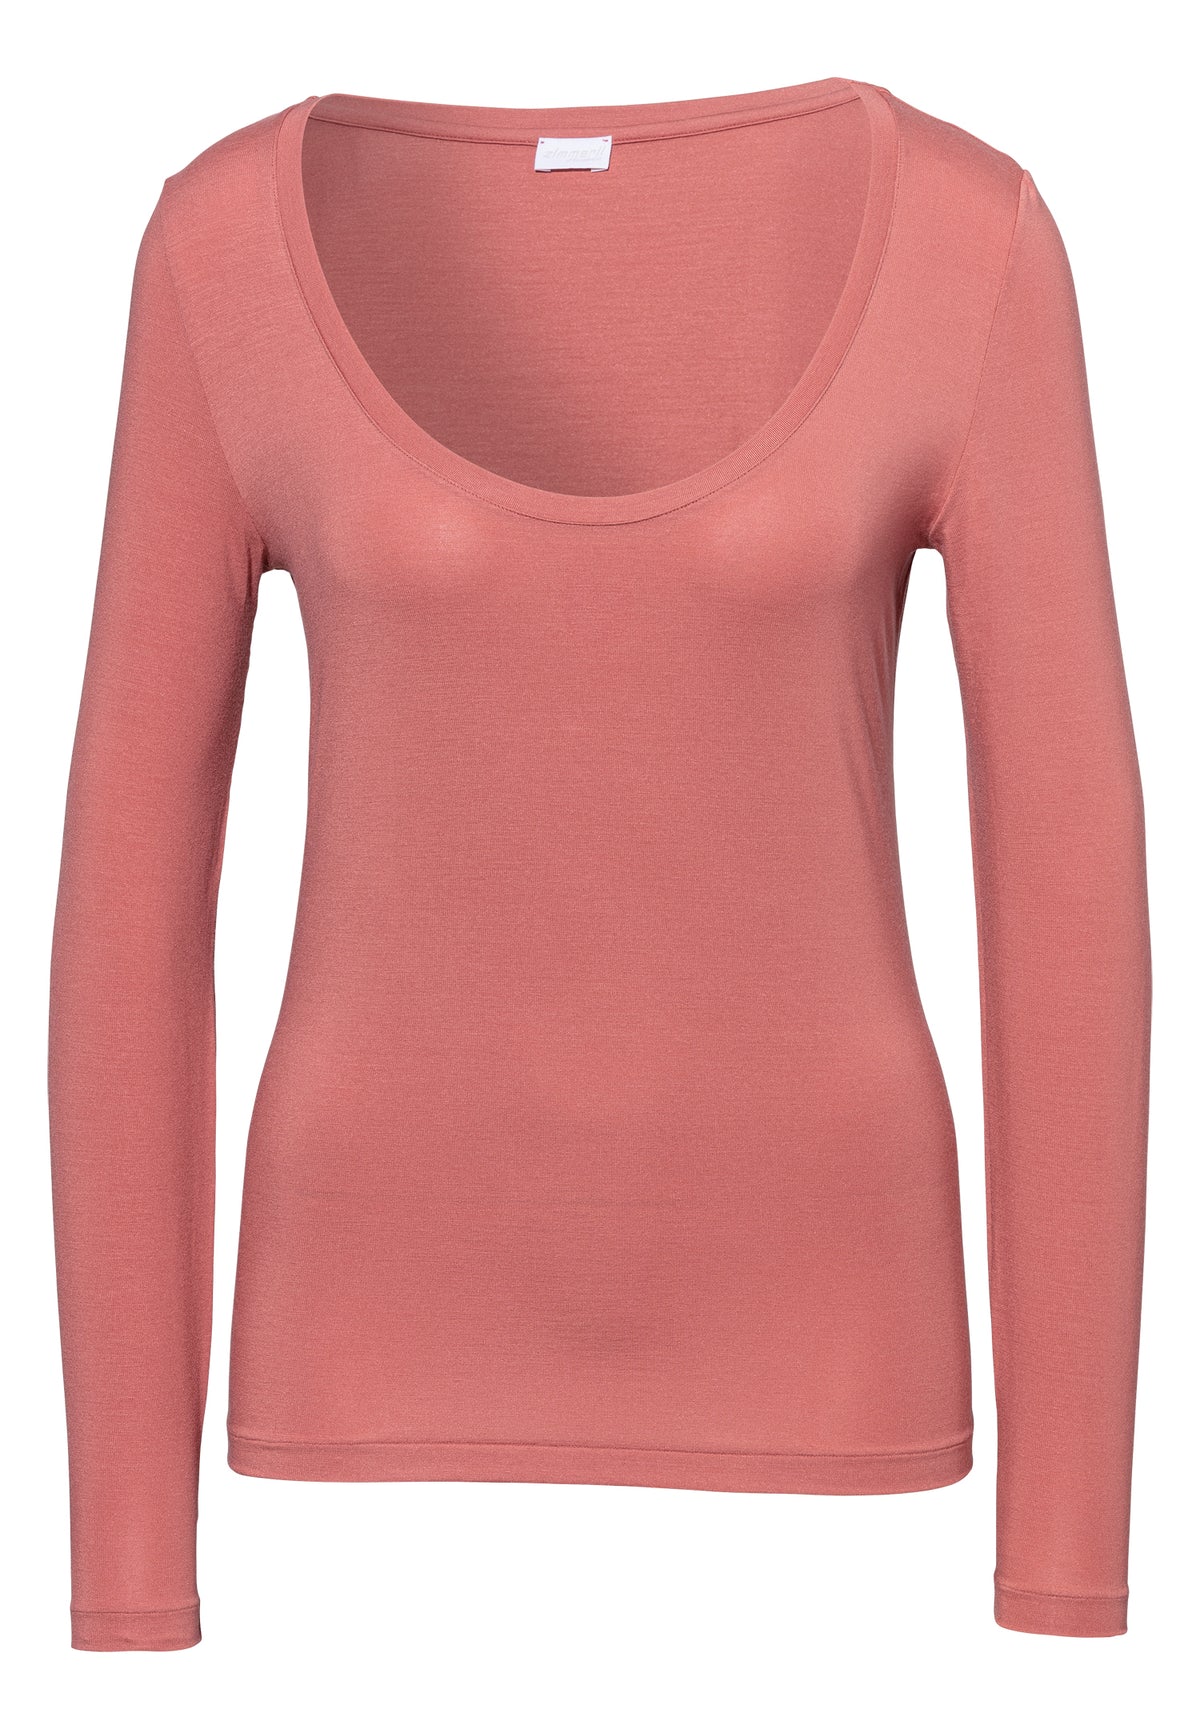 Pureness | T-Shirt langarm - coral rouge